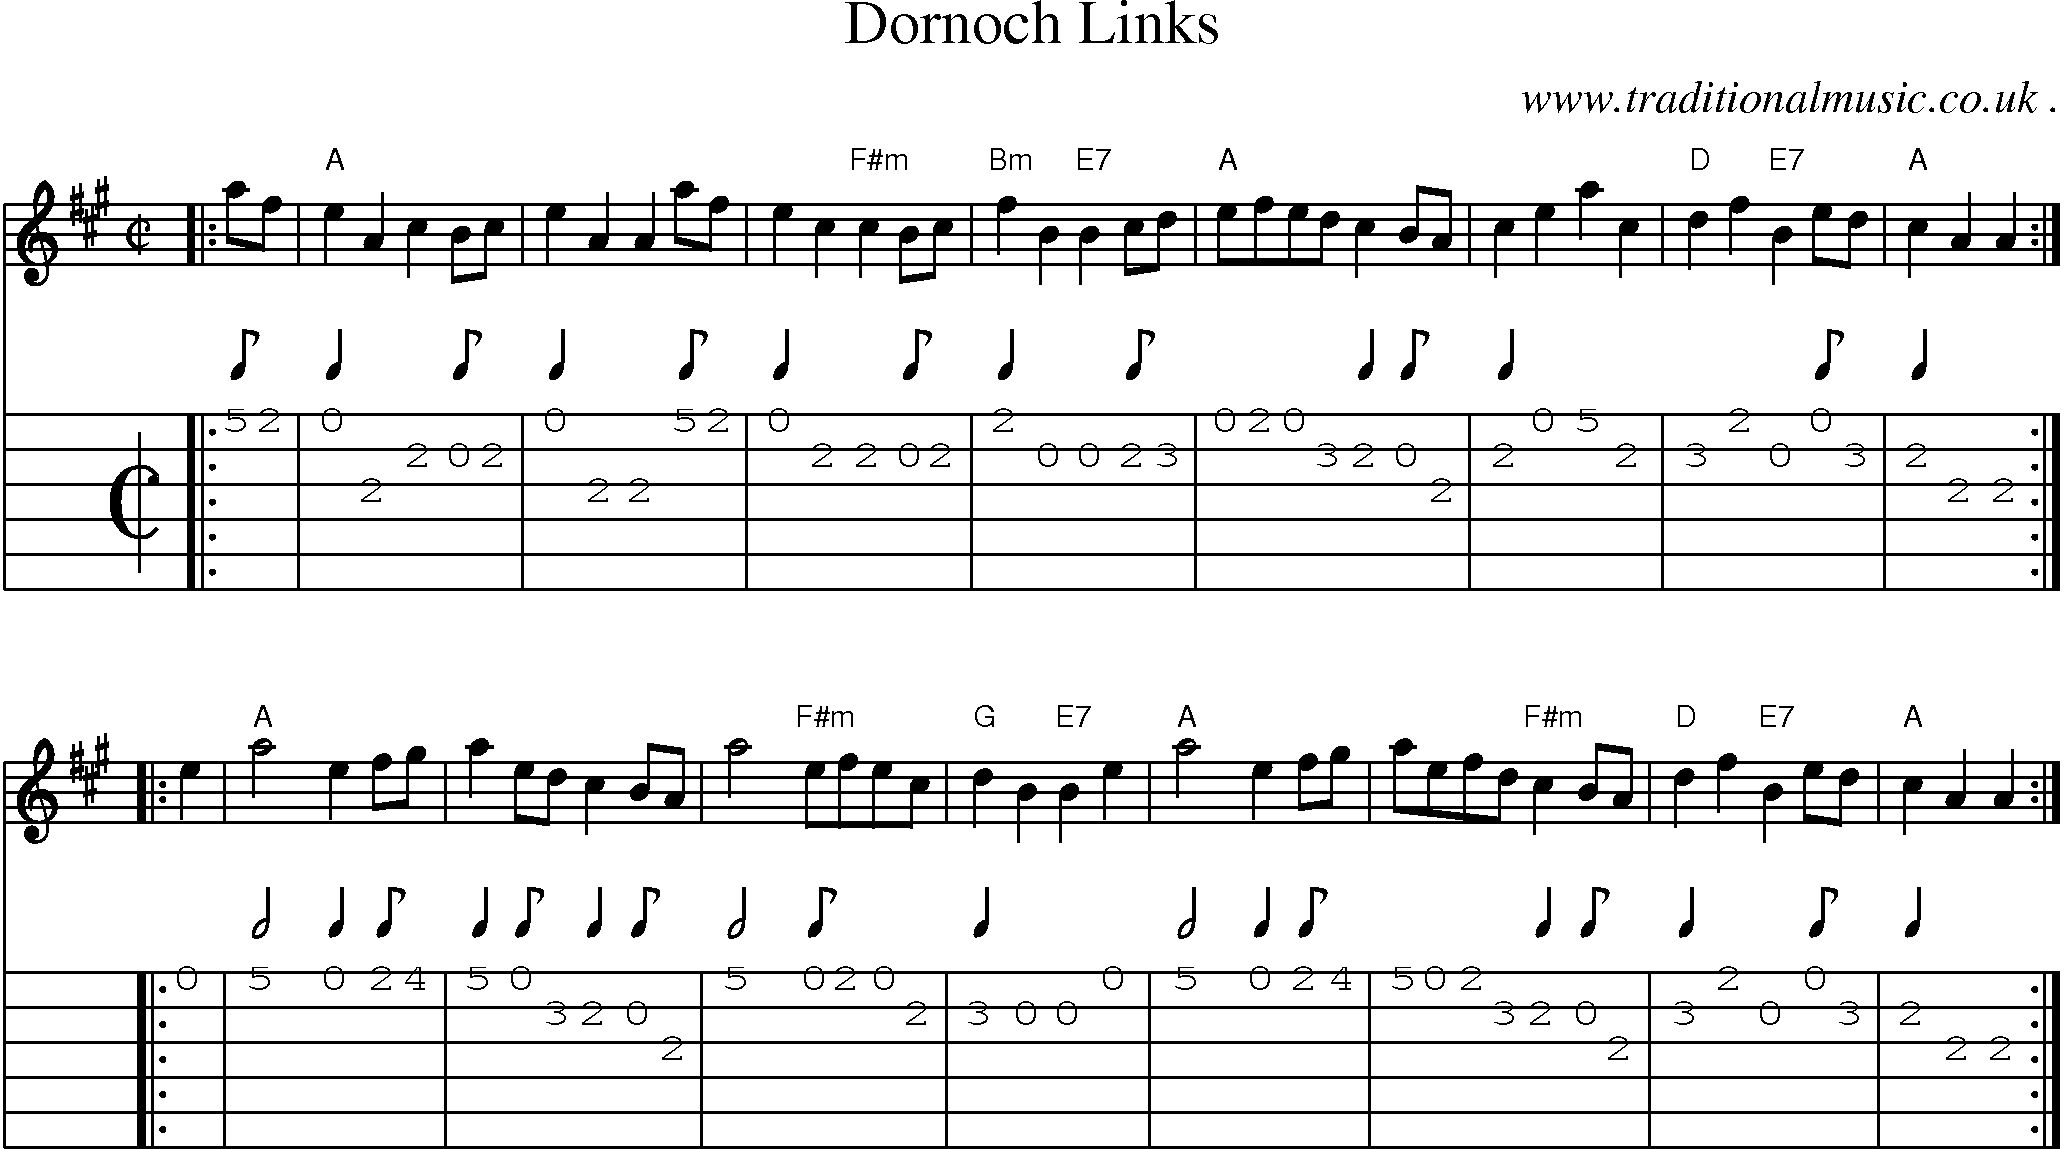 Sheet-music  score, Chords and Guitar Tabs for Dornoch Links